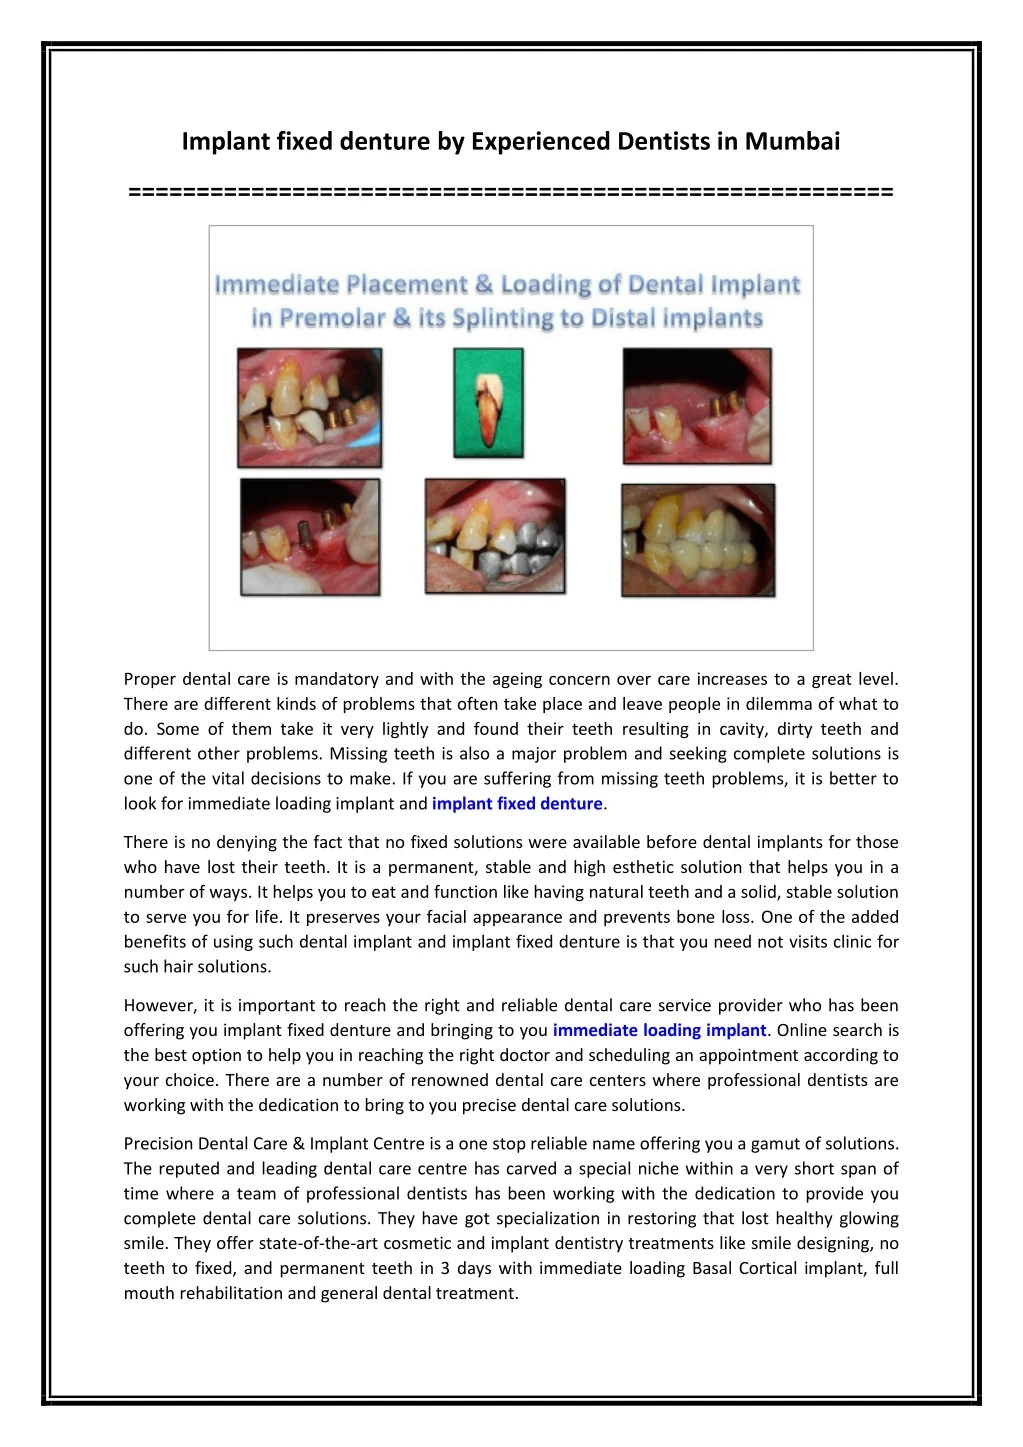 implant fixed denture by experienced dentists